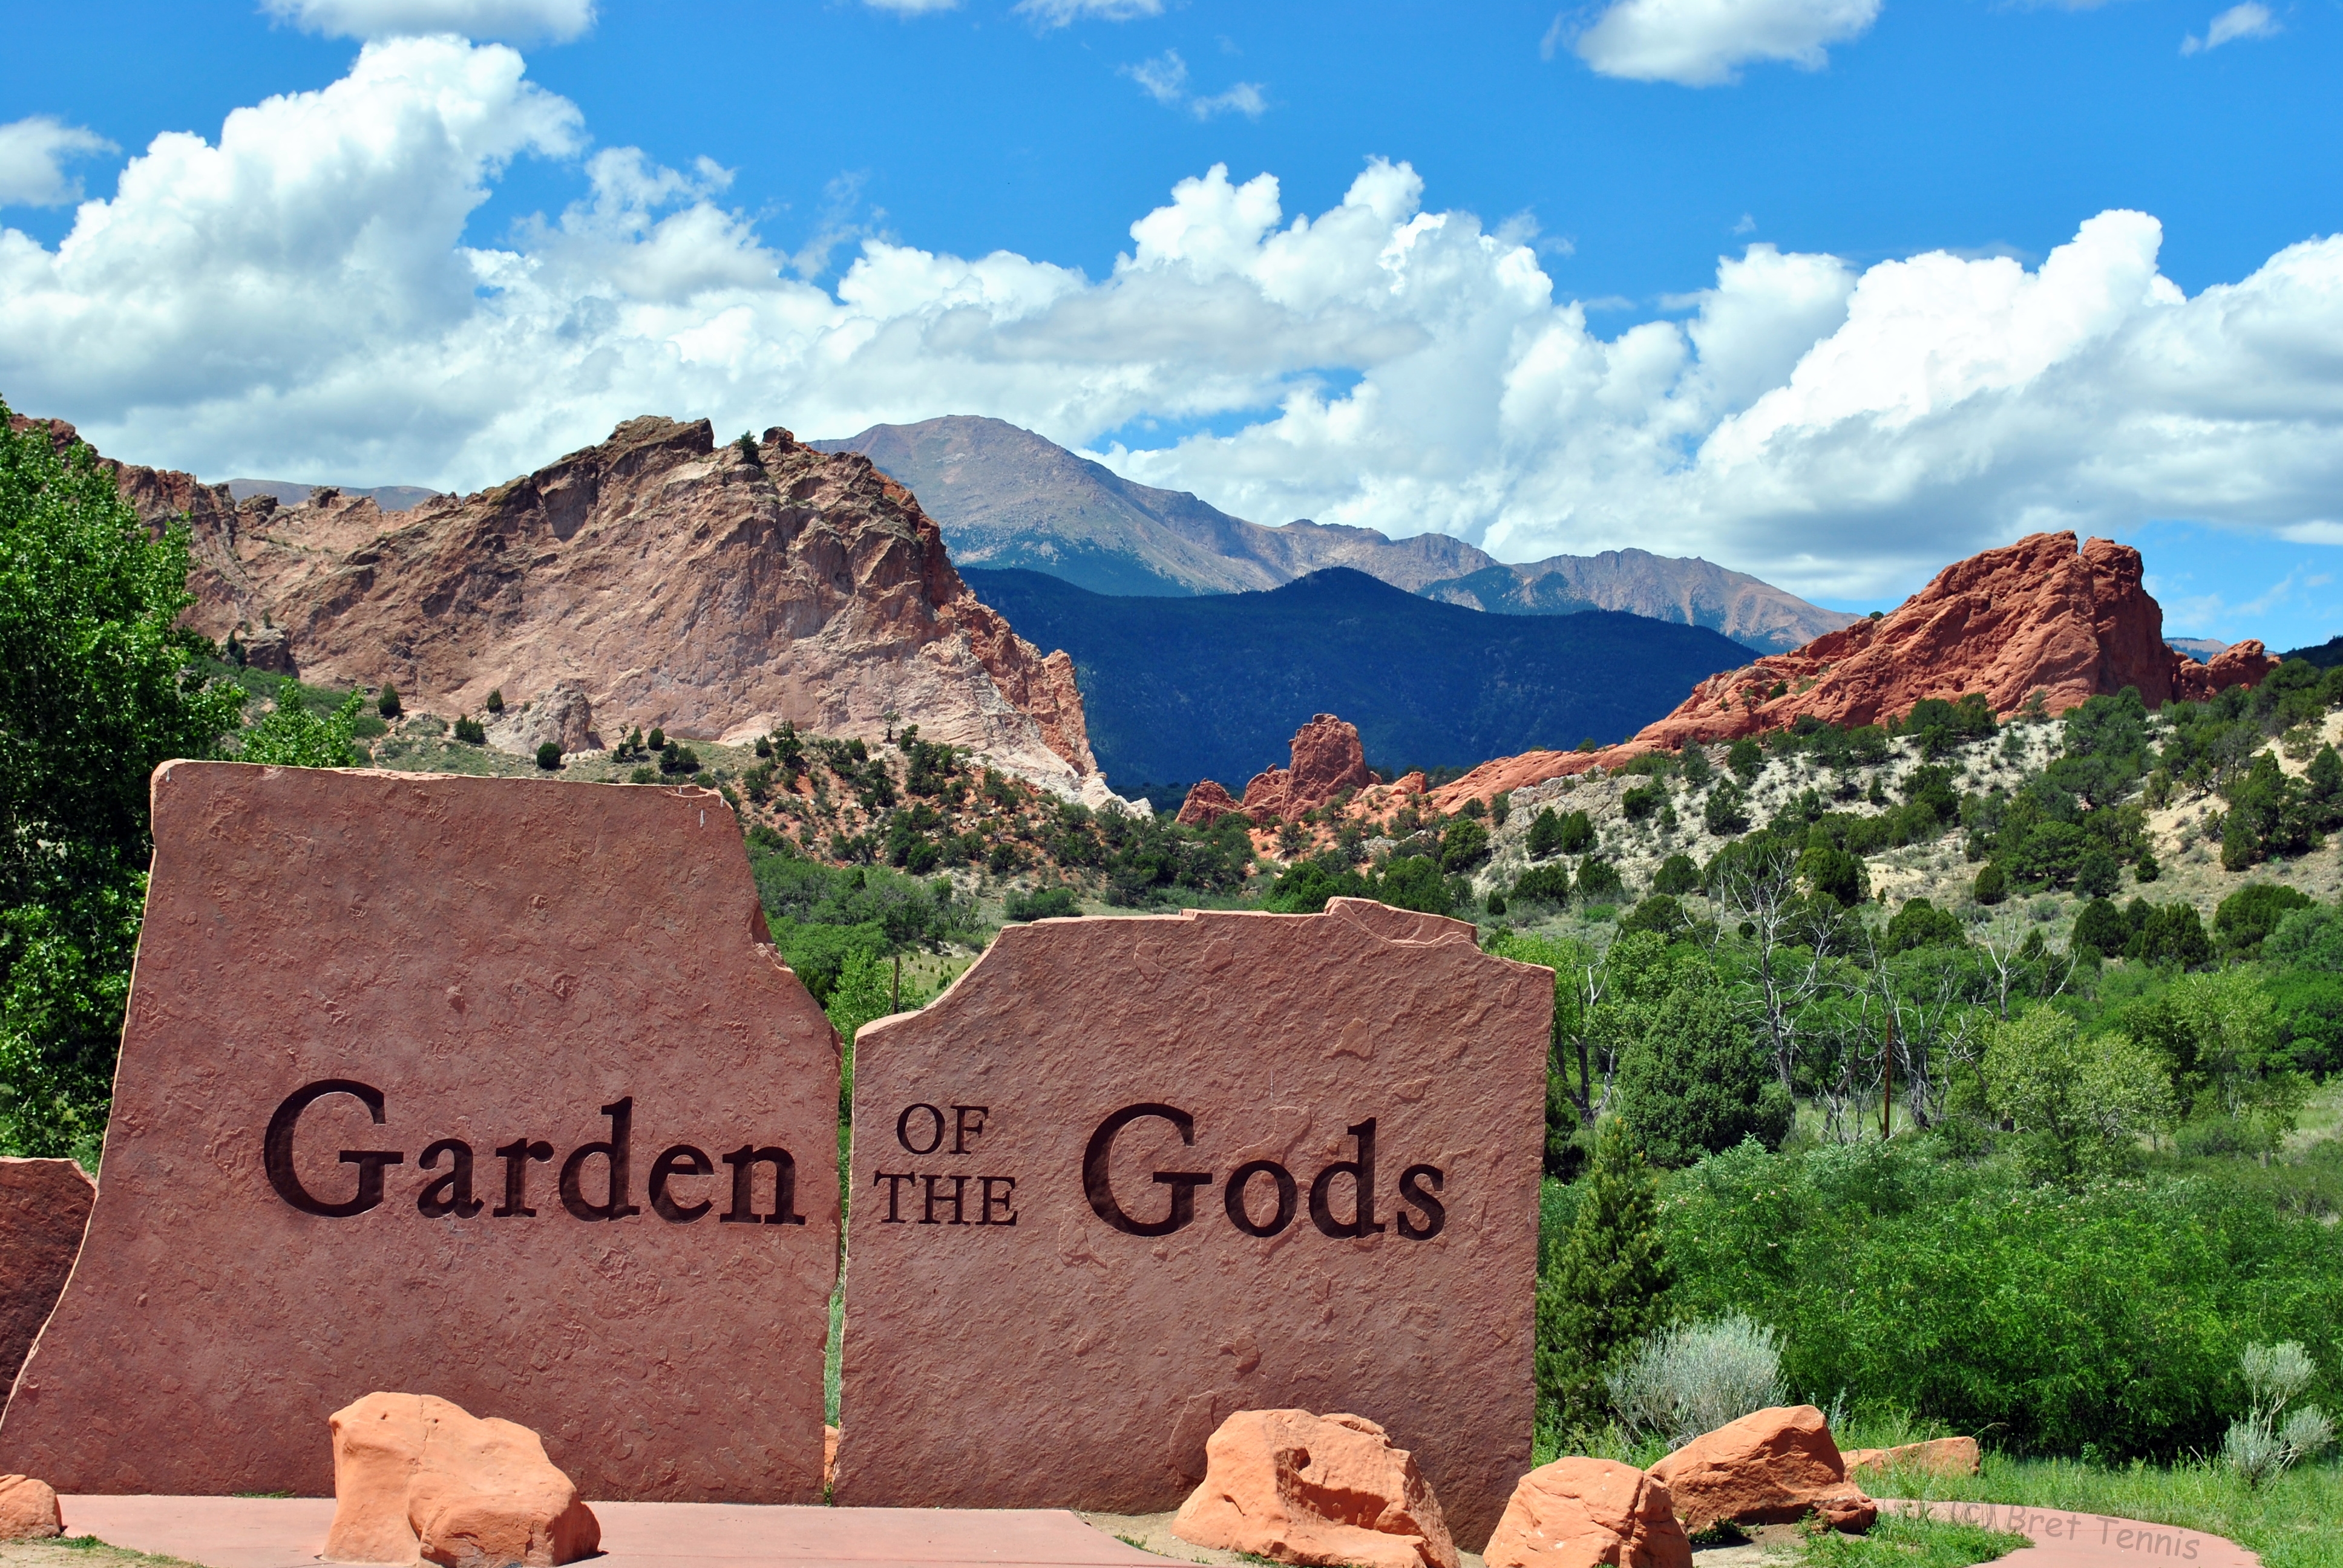 Garden of The Gods Visitor and Nature Center